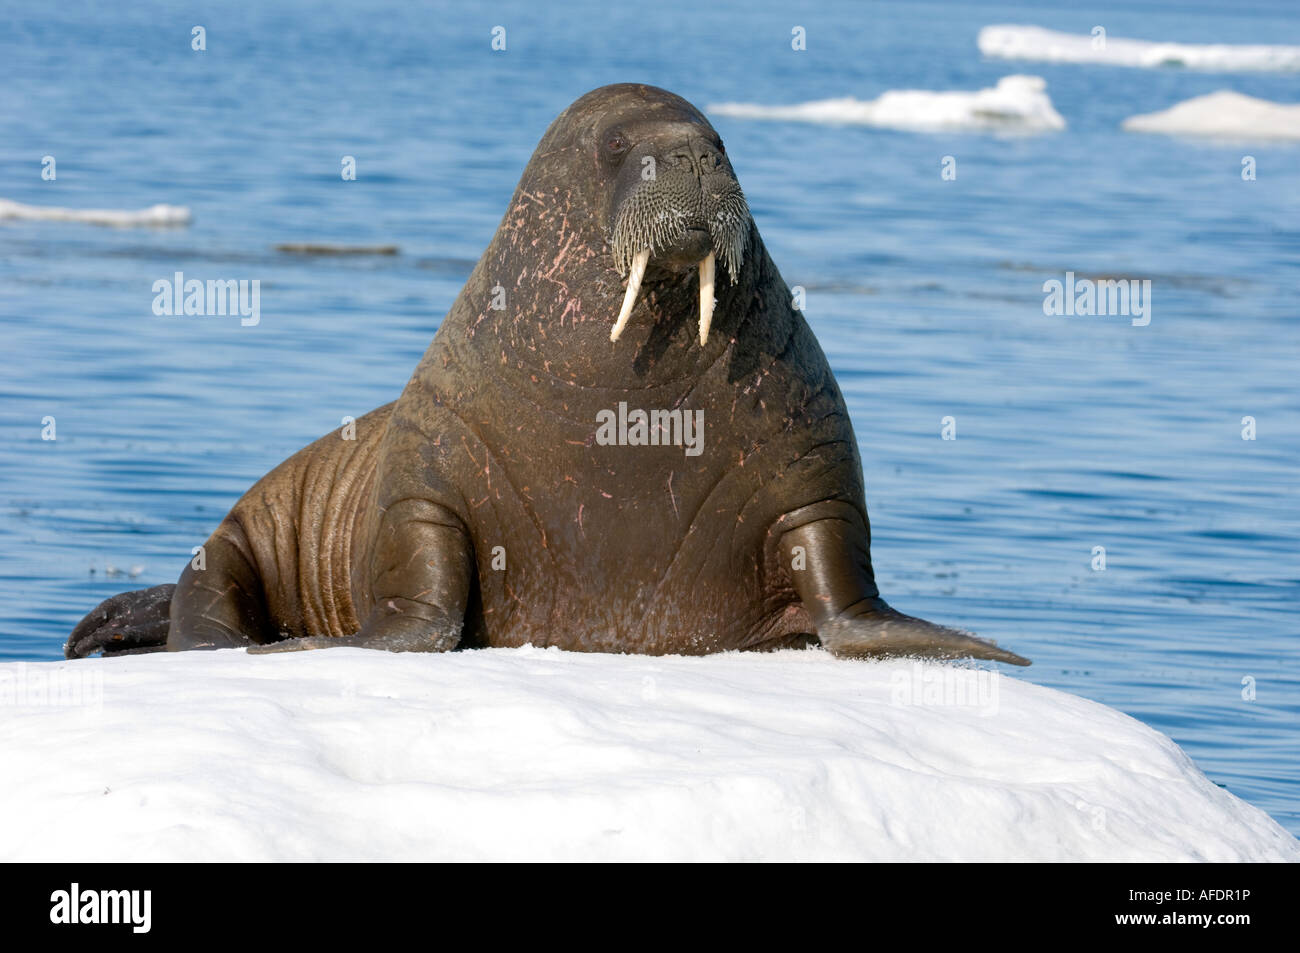 Female Atlantic walrus on ice floe.resting on ice floe the animal s skin flushes pink when warm to dissipate heat Stock Photo